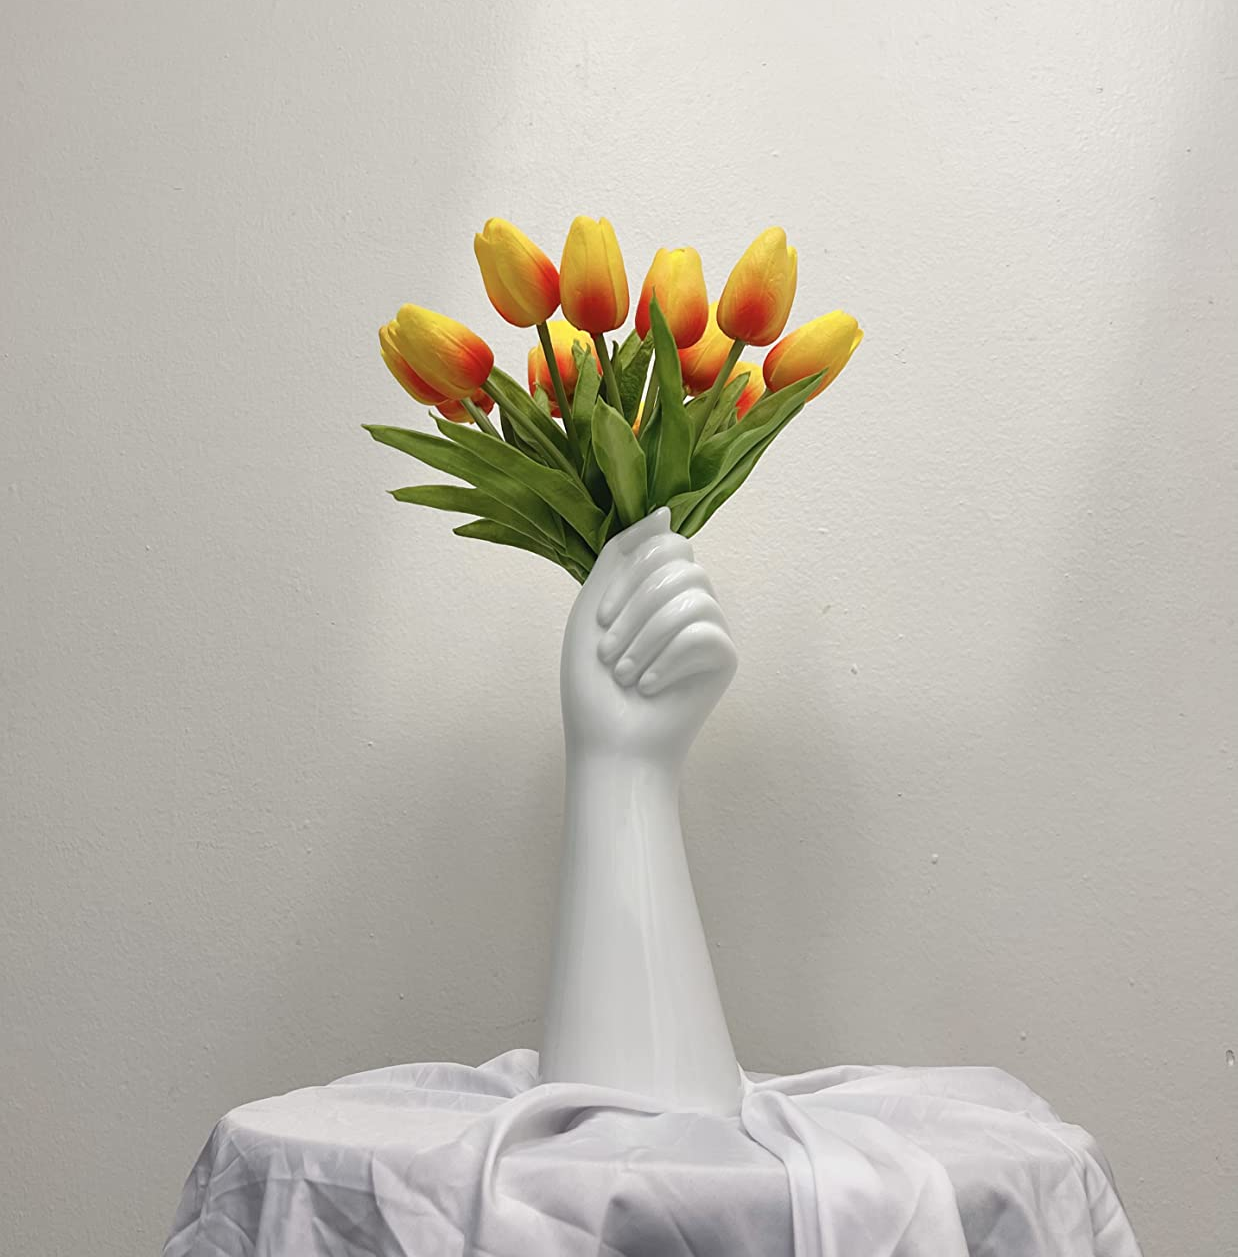 Reviewer image of yellow tulips inside a white hand-shaped vase on top of a table with a white tablecloth